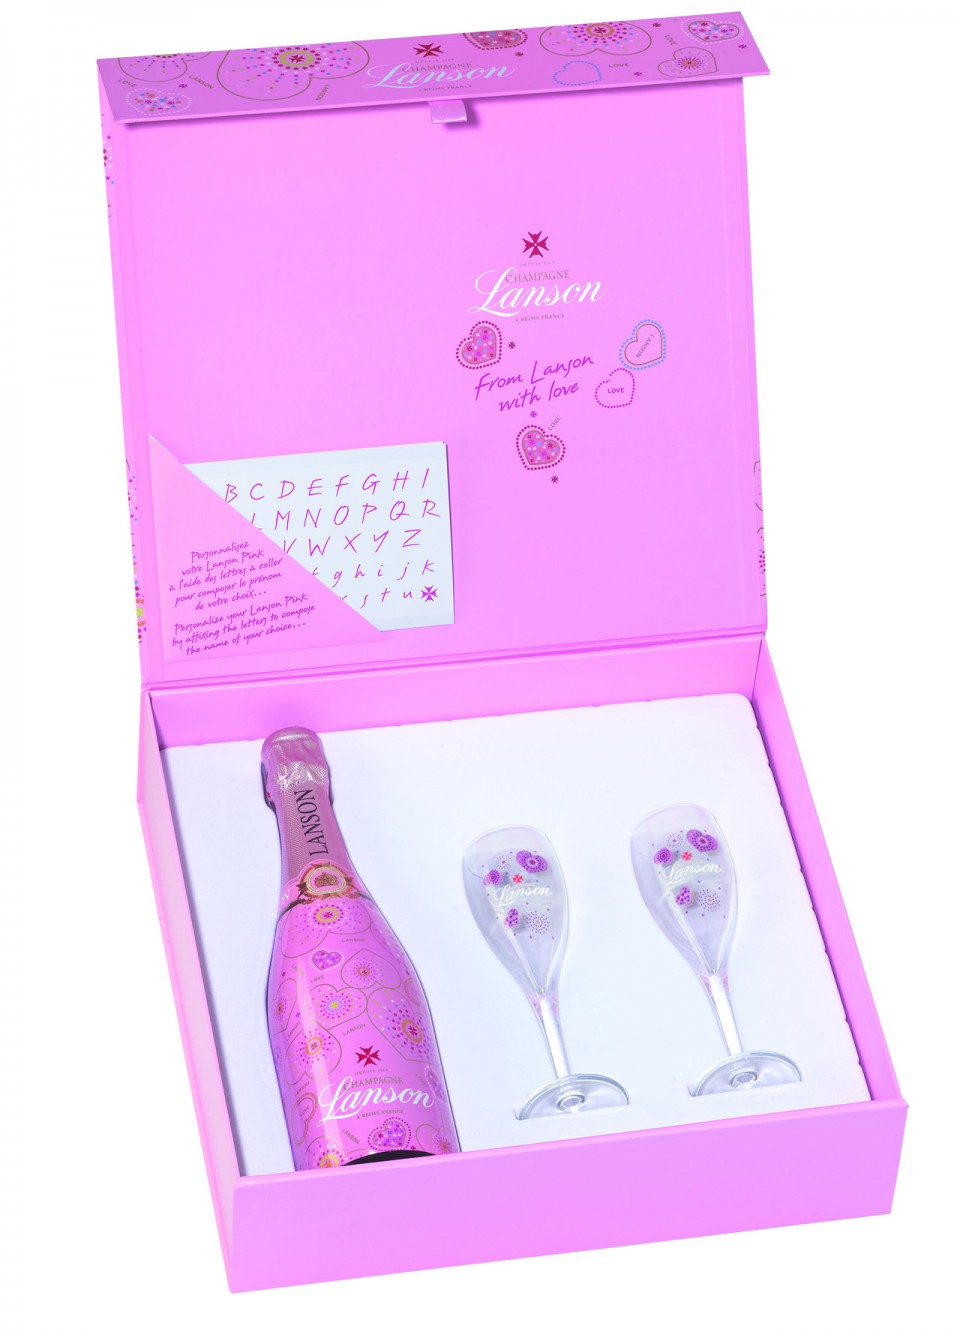 MD - Coffret PINK LOVE 2014 ouvert - 1Mo